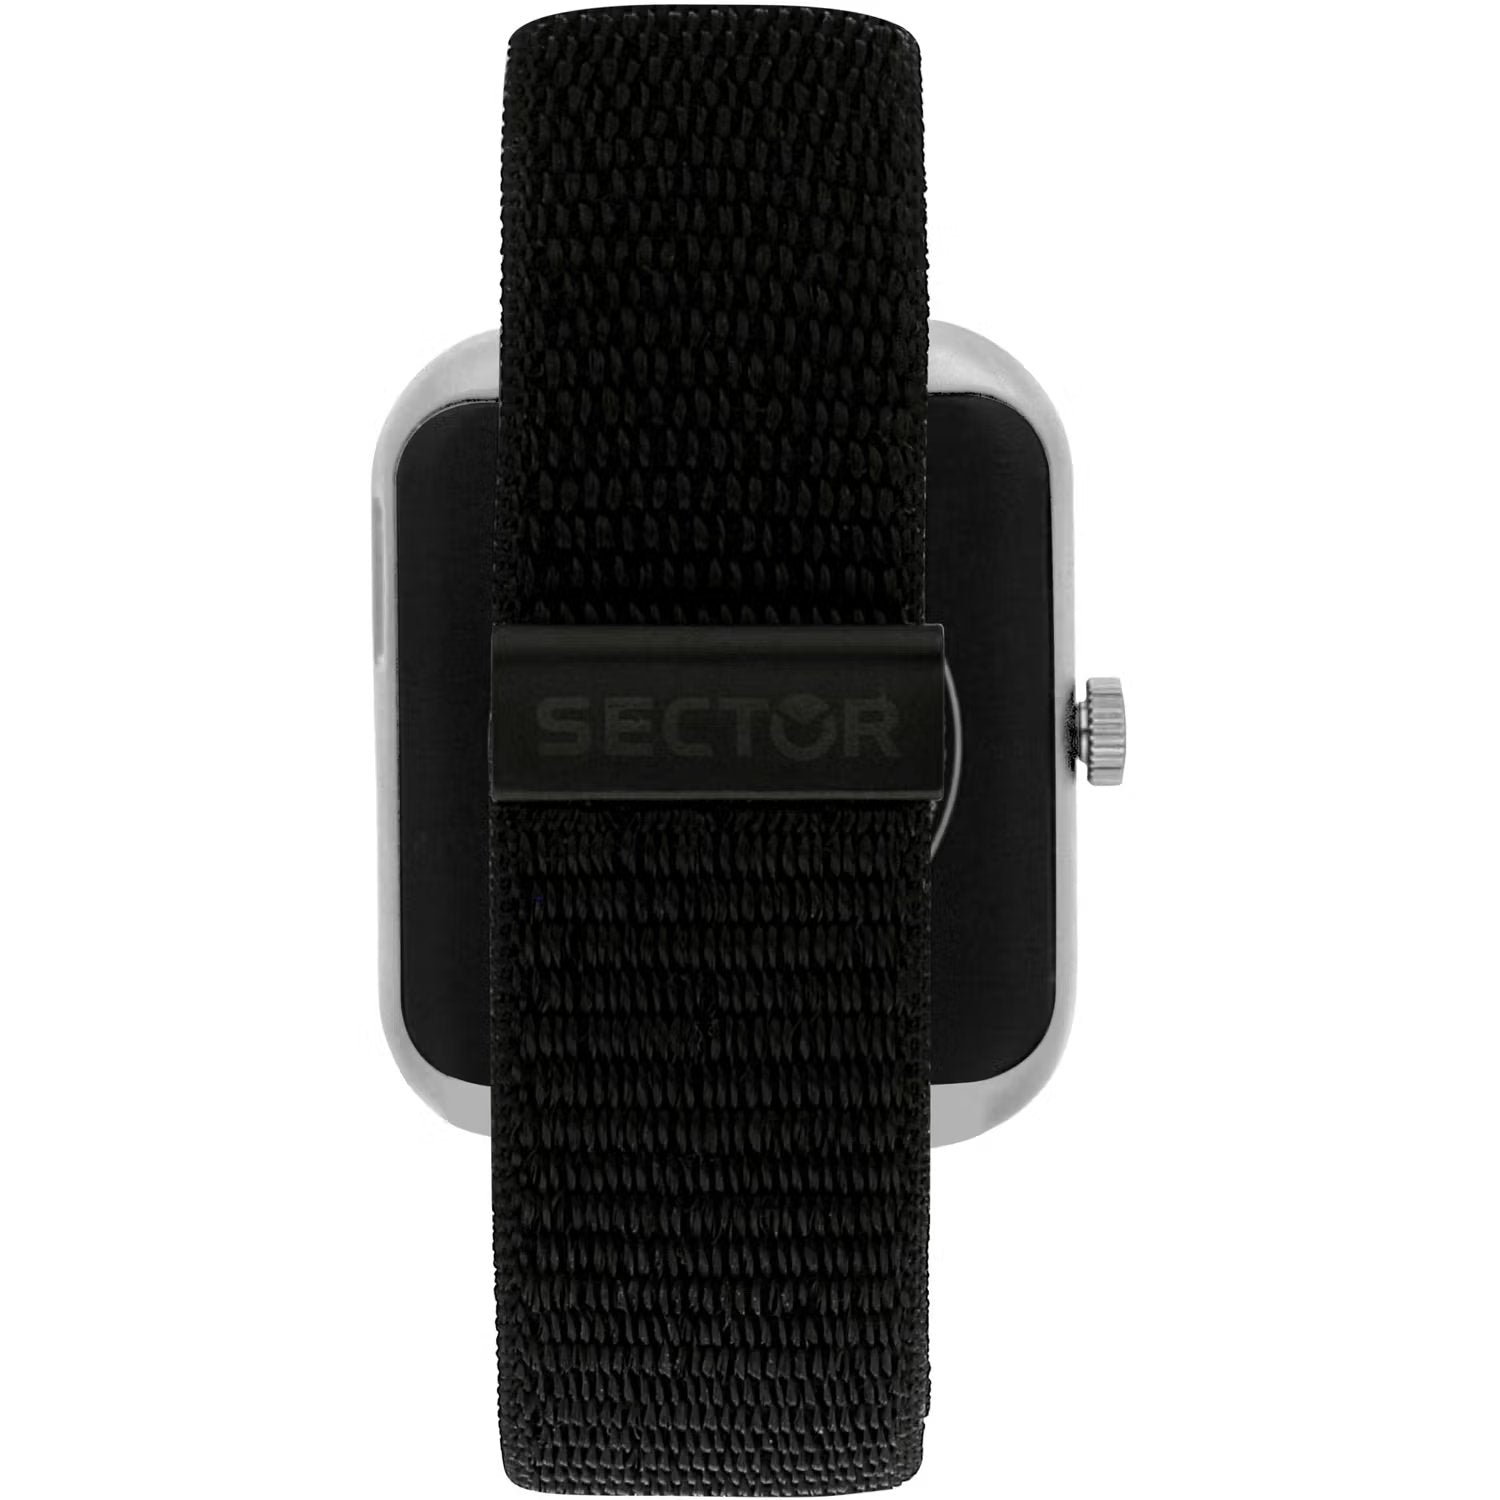 S-03 Pro Watch R3251159003 Sector